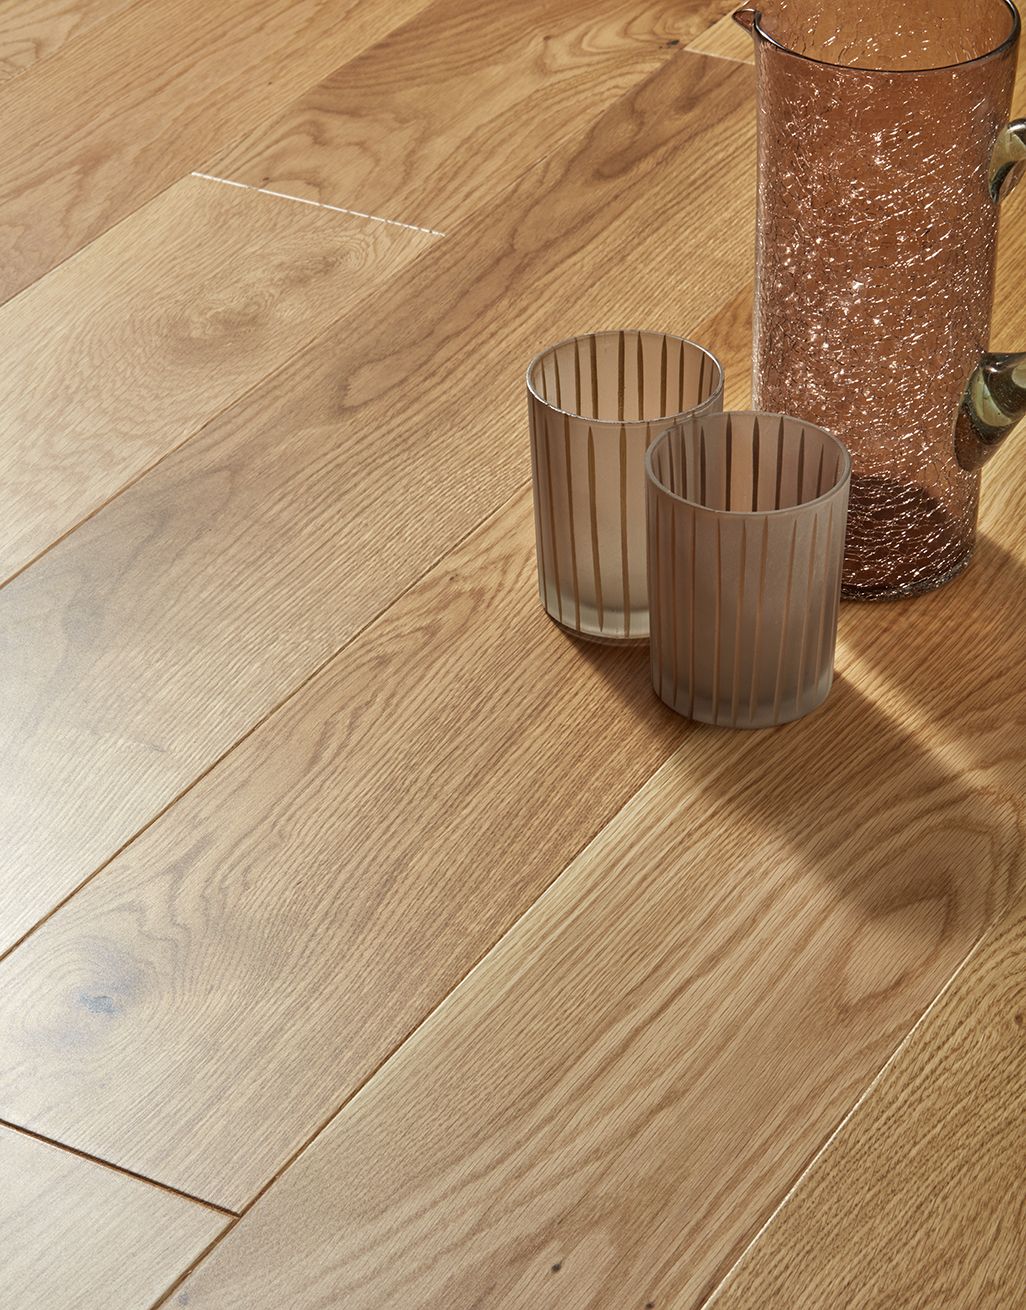 Carpenters Choice Natural 14mm x 155mm Lacquered Engineered Wood Flooring 2